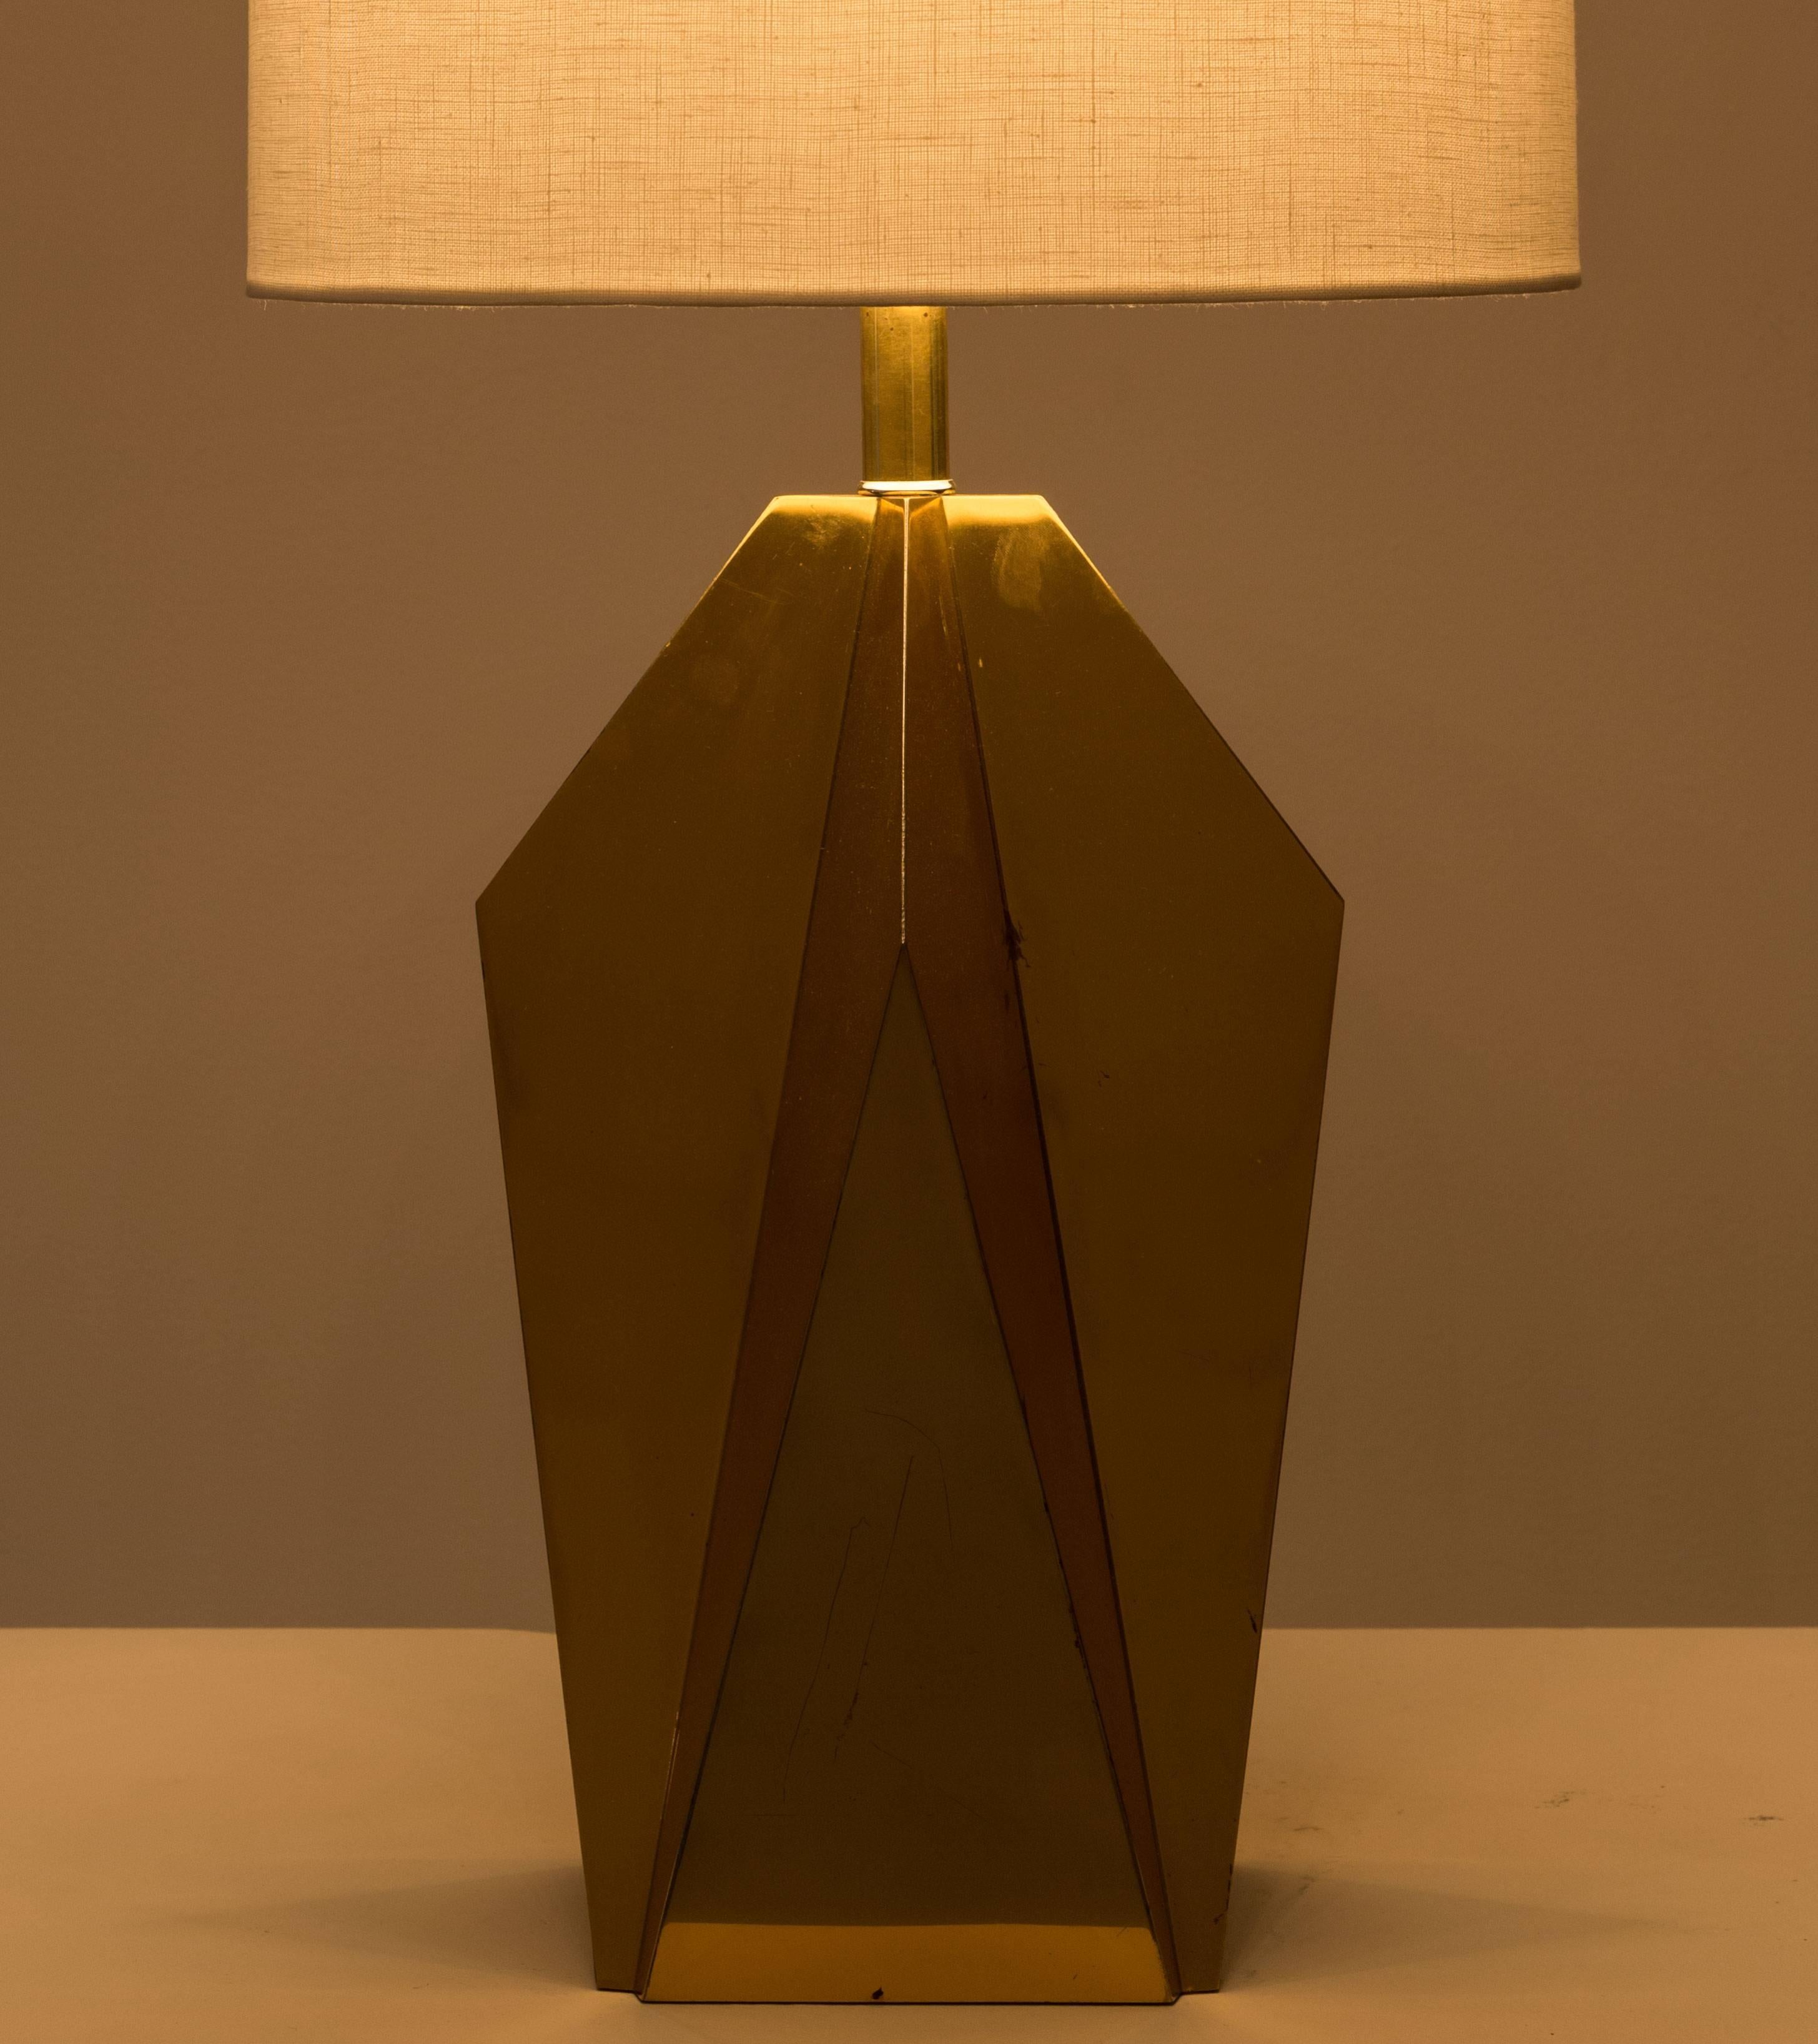 Pair of brass table lamps with geometric metal work. Designed in the U.S. in the 1960s. Shades not included. Original cords. Takes two E26 75w maximum bulbs.